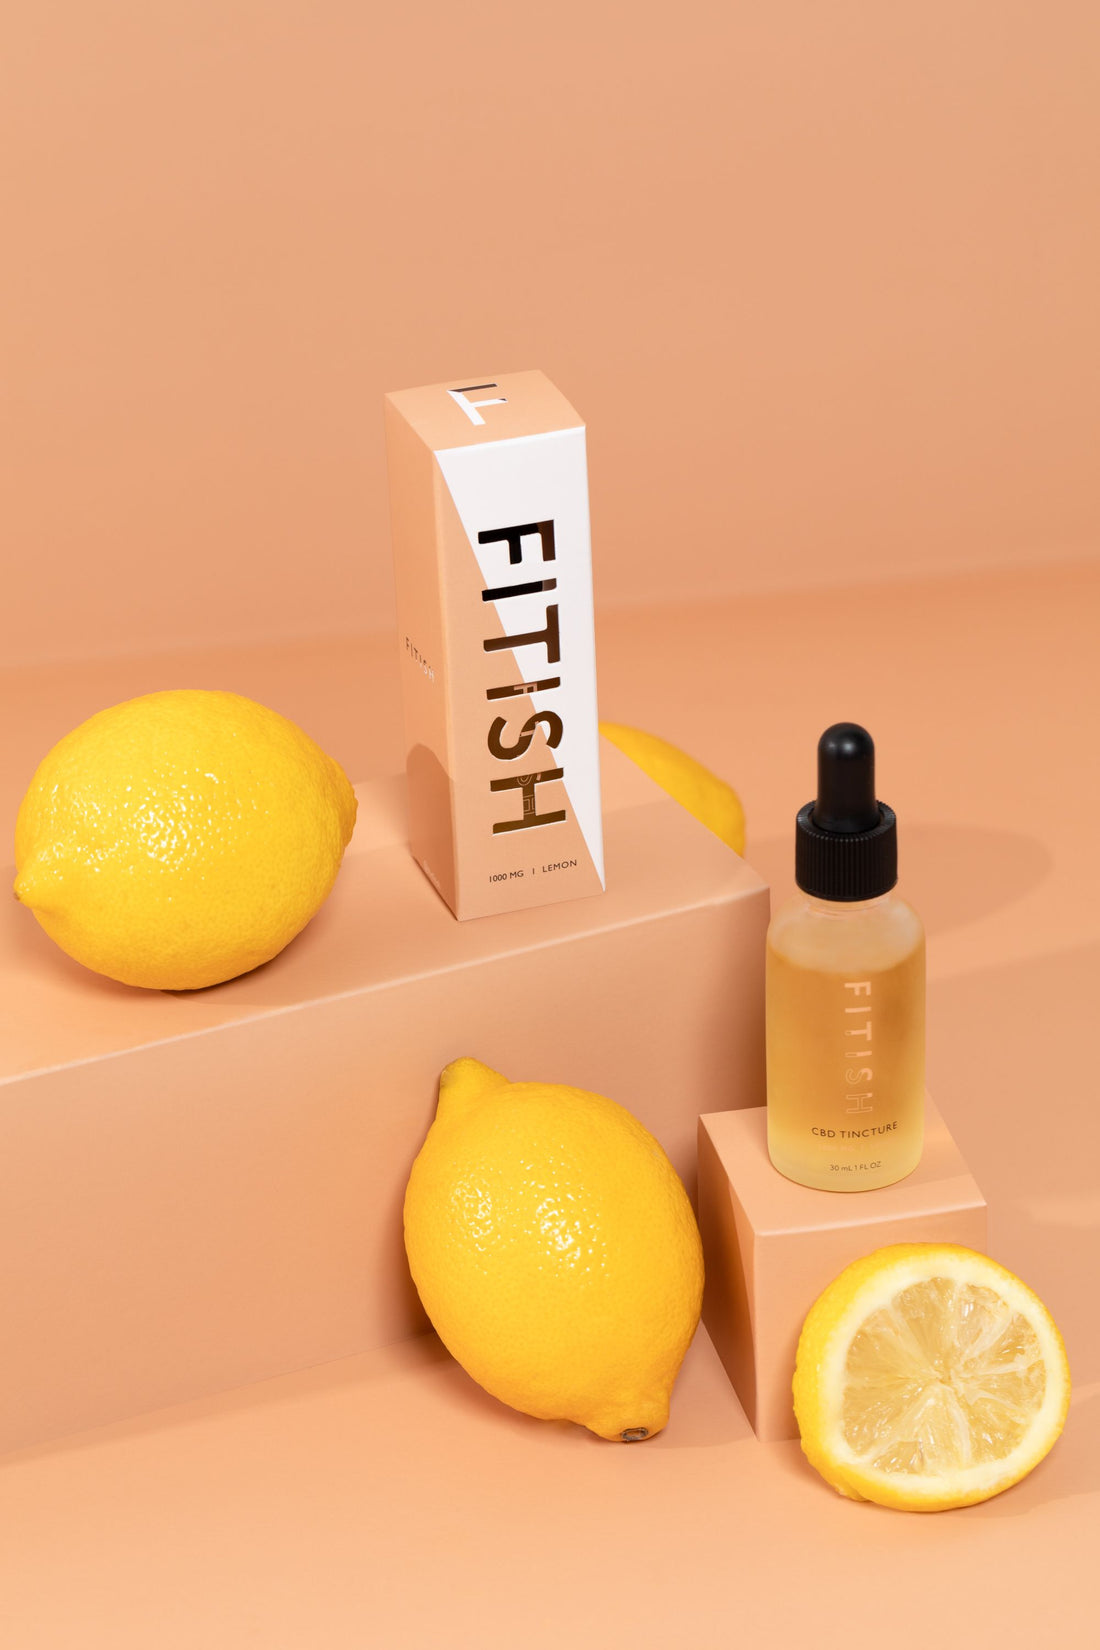 fitish lemon cbd tincture dry skin skin dry skin skin for dry skin dry skin dry skin a dry skin dry skin skin dry skin and dry skin dry skin that is dry xerosis skin scaly skin skin type flaky skin ashy skin best beauty shop oily face mature skin rough skin skin mature dry patches chapped skin before and after skincare beauty &amp; beauty before after skincare an skin beauty type beauty beauty type